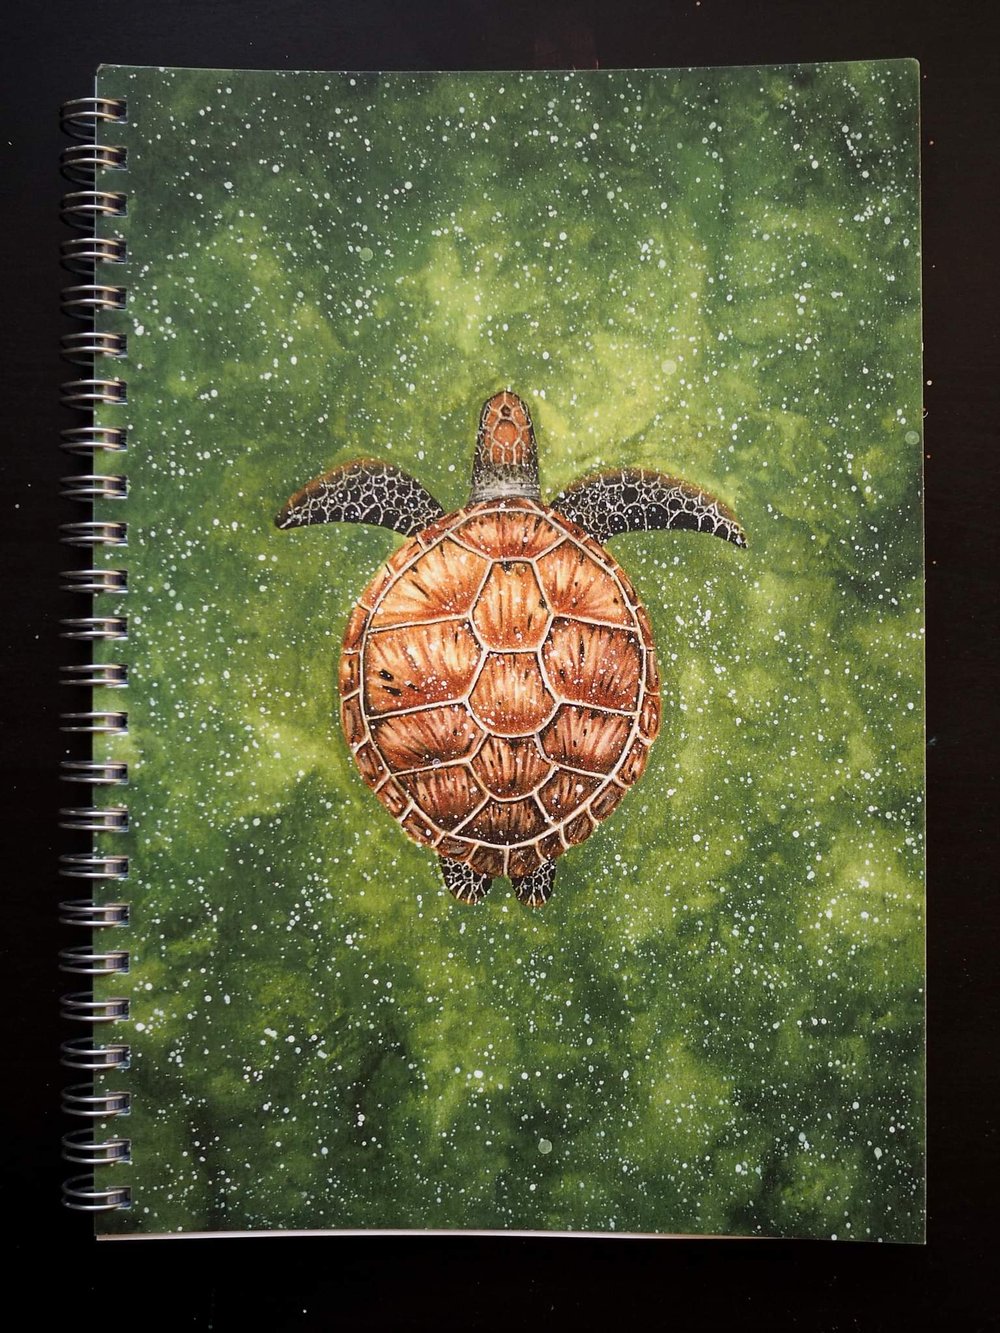 Green Sea Turtle Spiral Notebook Ruled